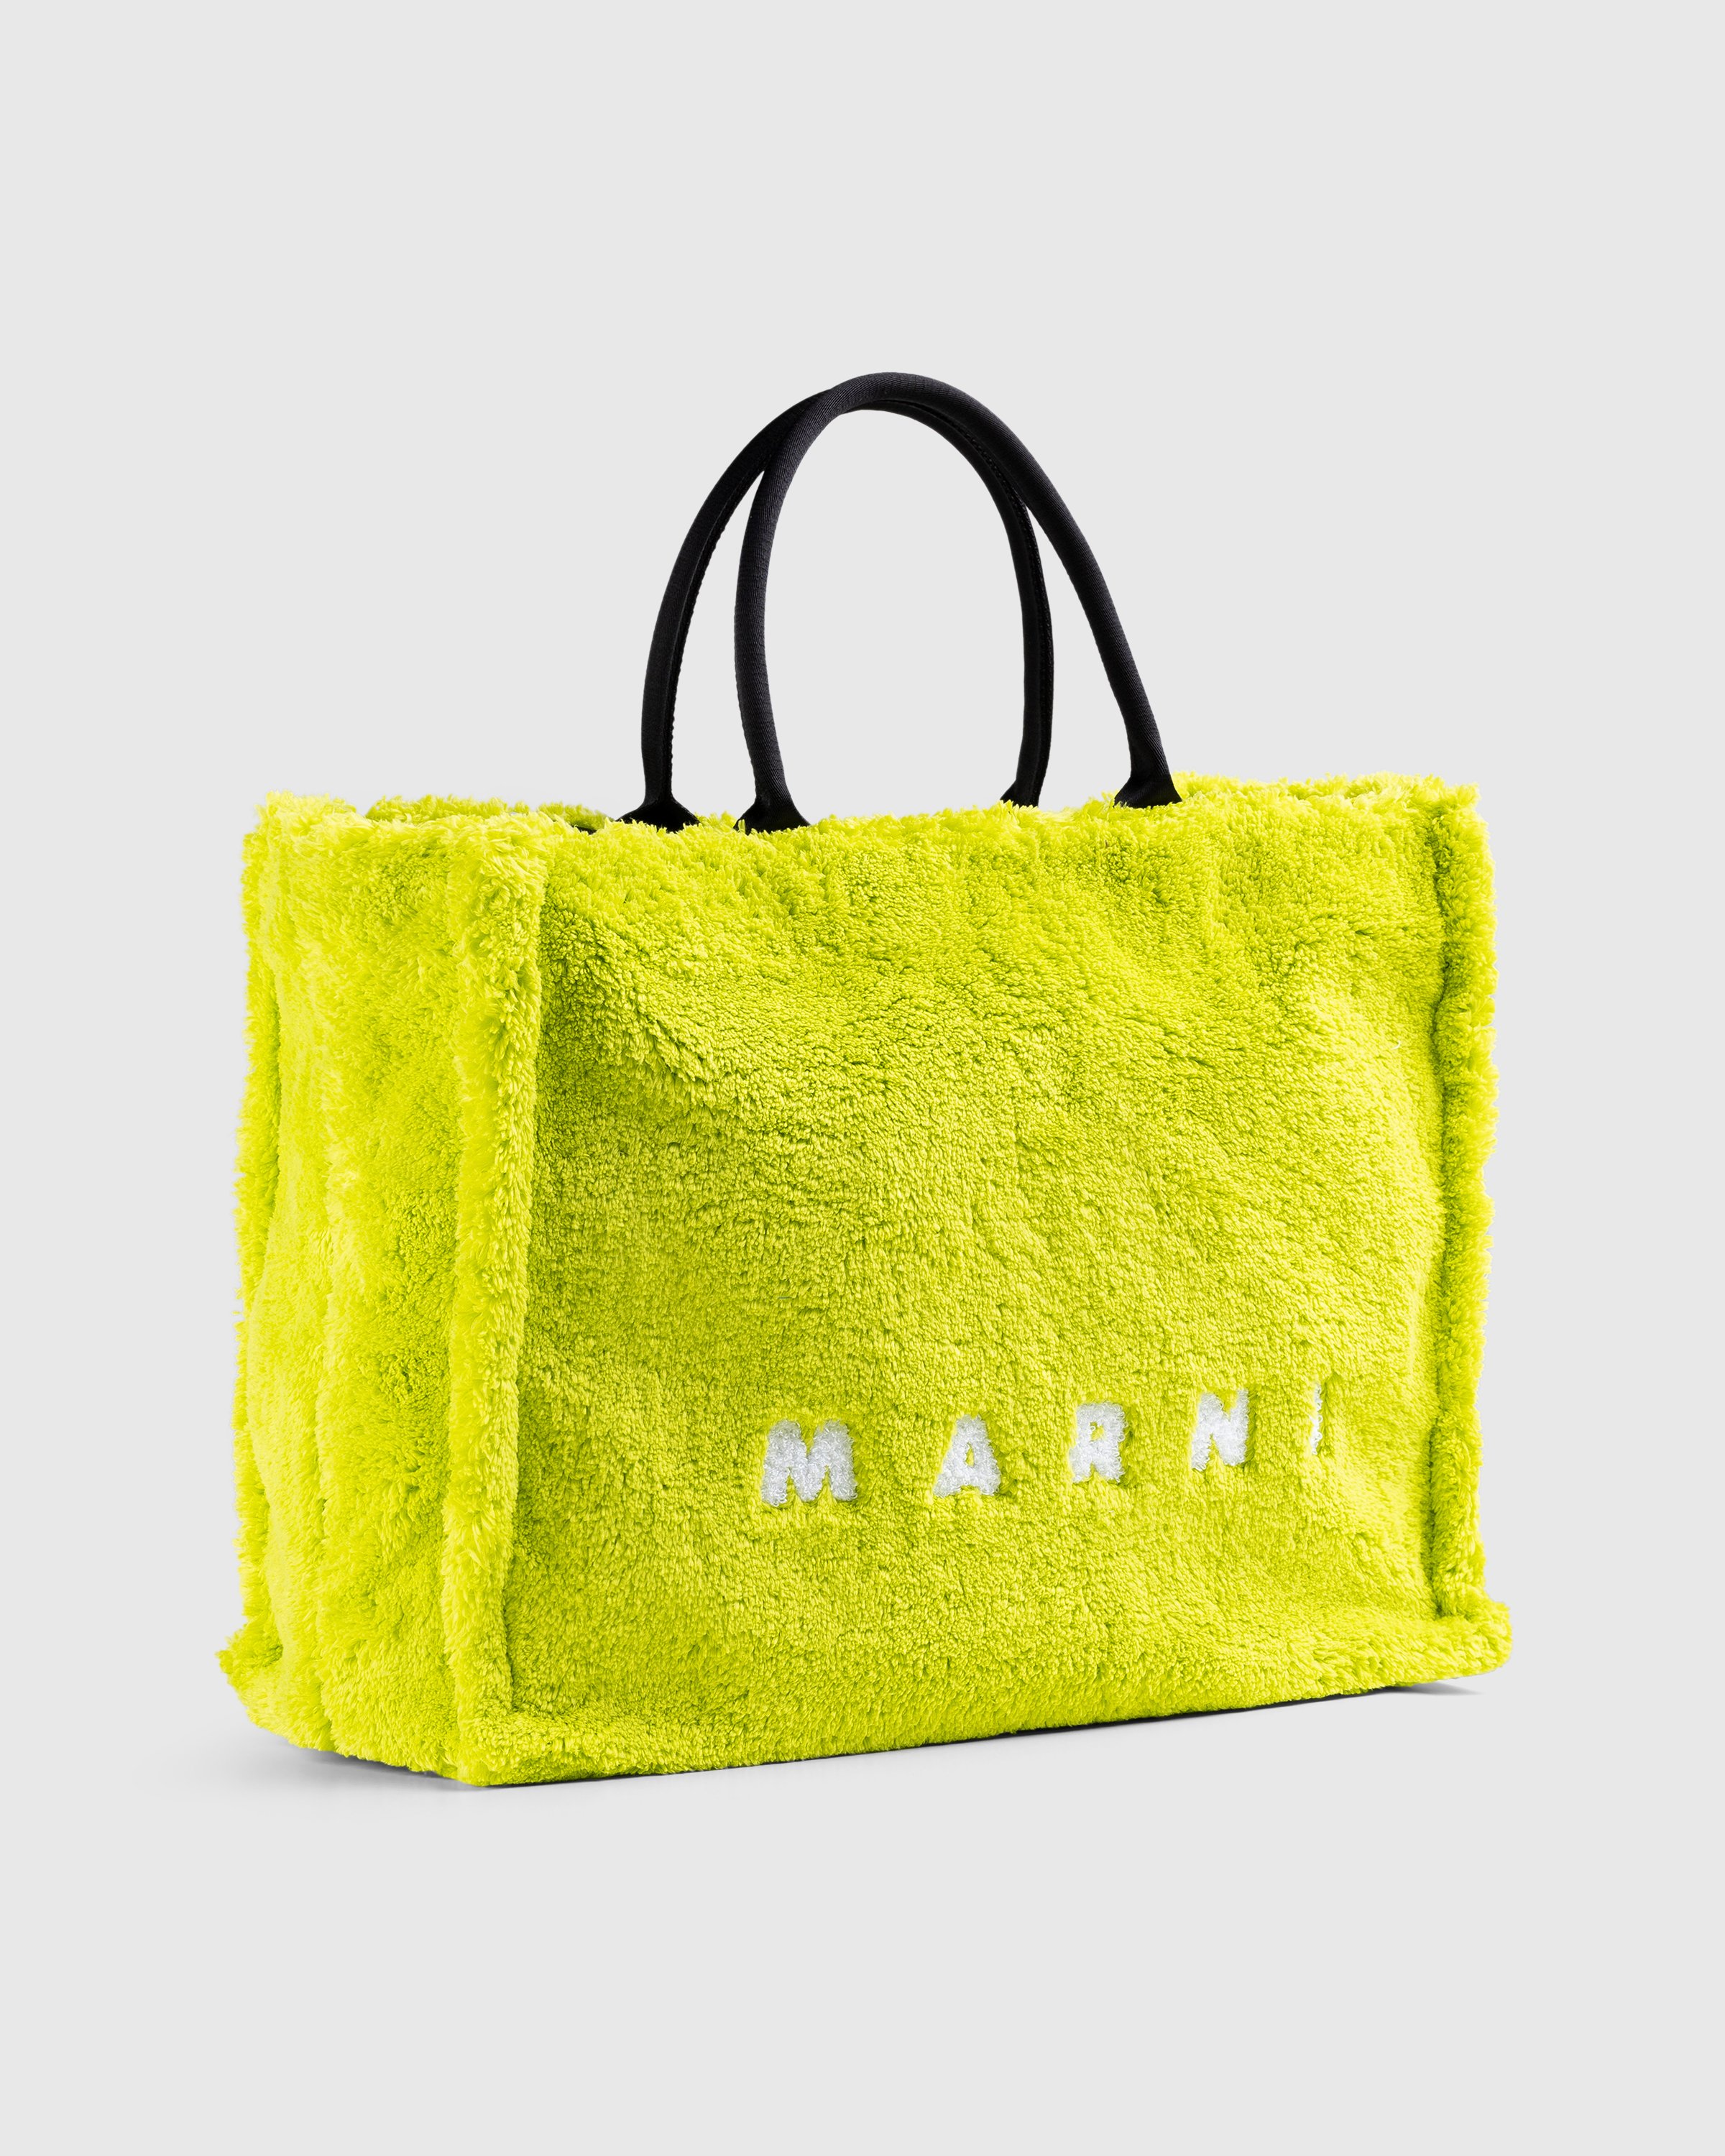 Marni - Terry Cloth Tote Bag Light Lime - Accessories - Green - Image 3